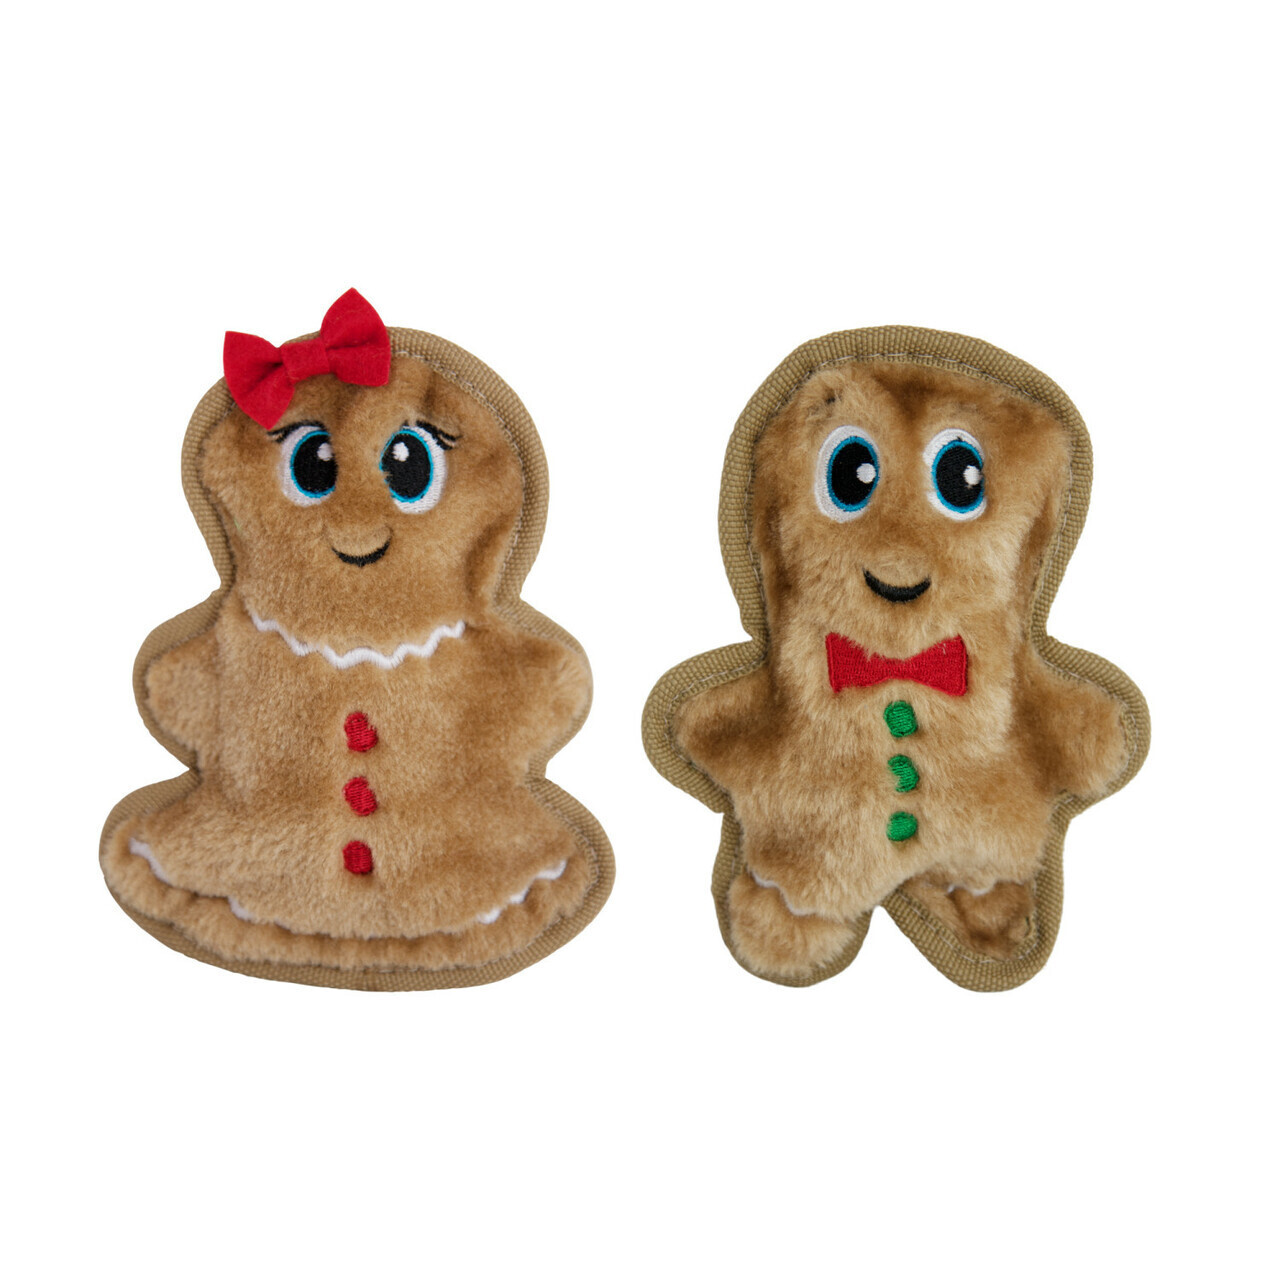 OUTWARD HOUND INVINCIBLES - GINGERBREAD 2 PACK